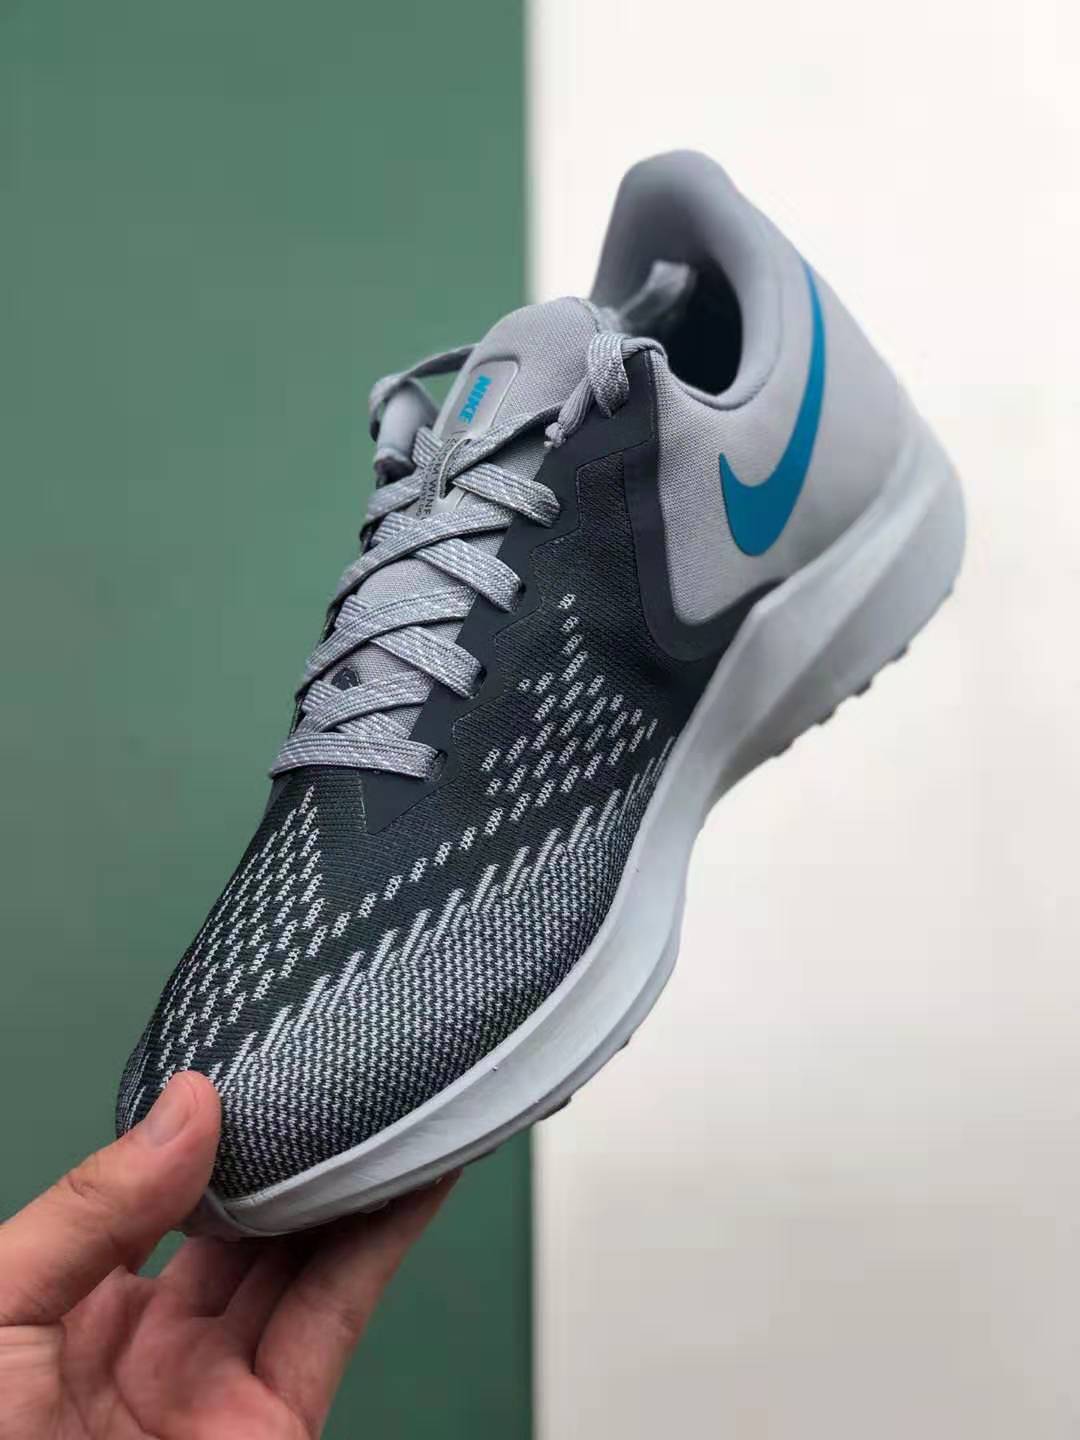 Nike Zoom Winflo 6 'Obsidian Mist' AQ7497-400 - Lightweight & Cushioned Running Shoes for Men | Shop Now